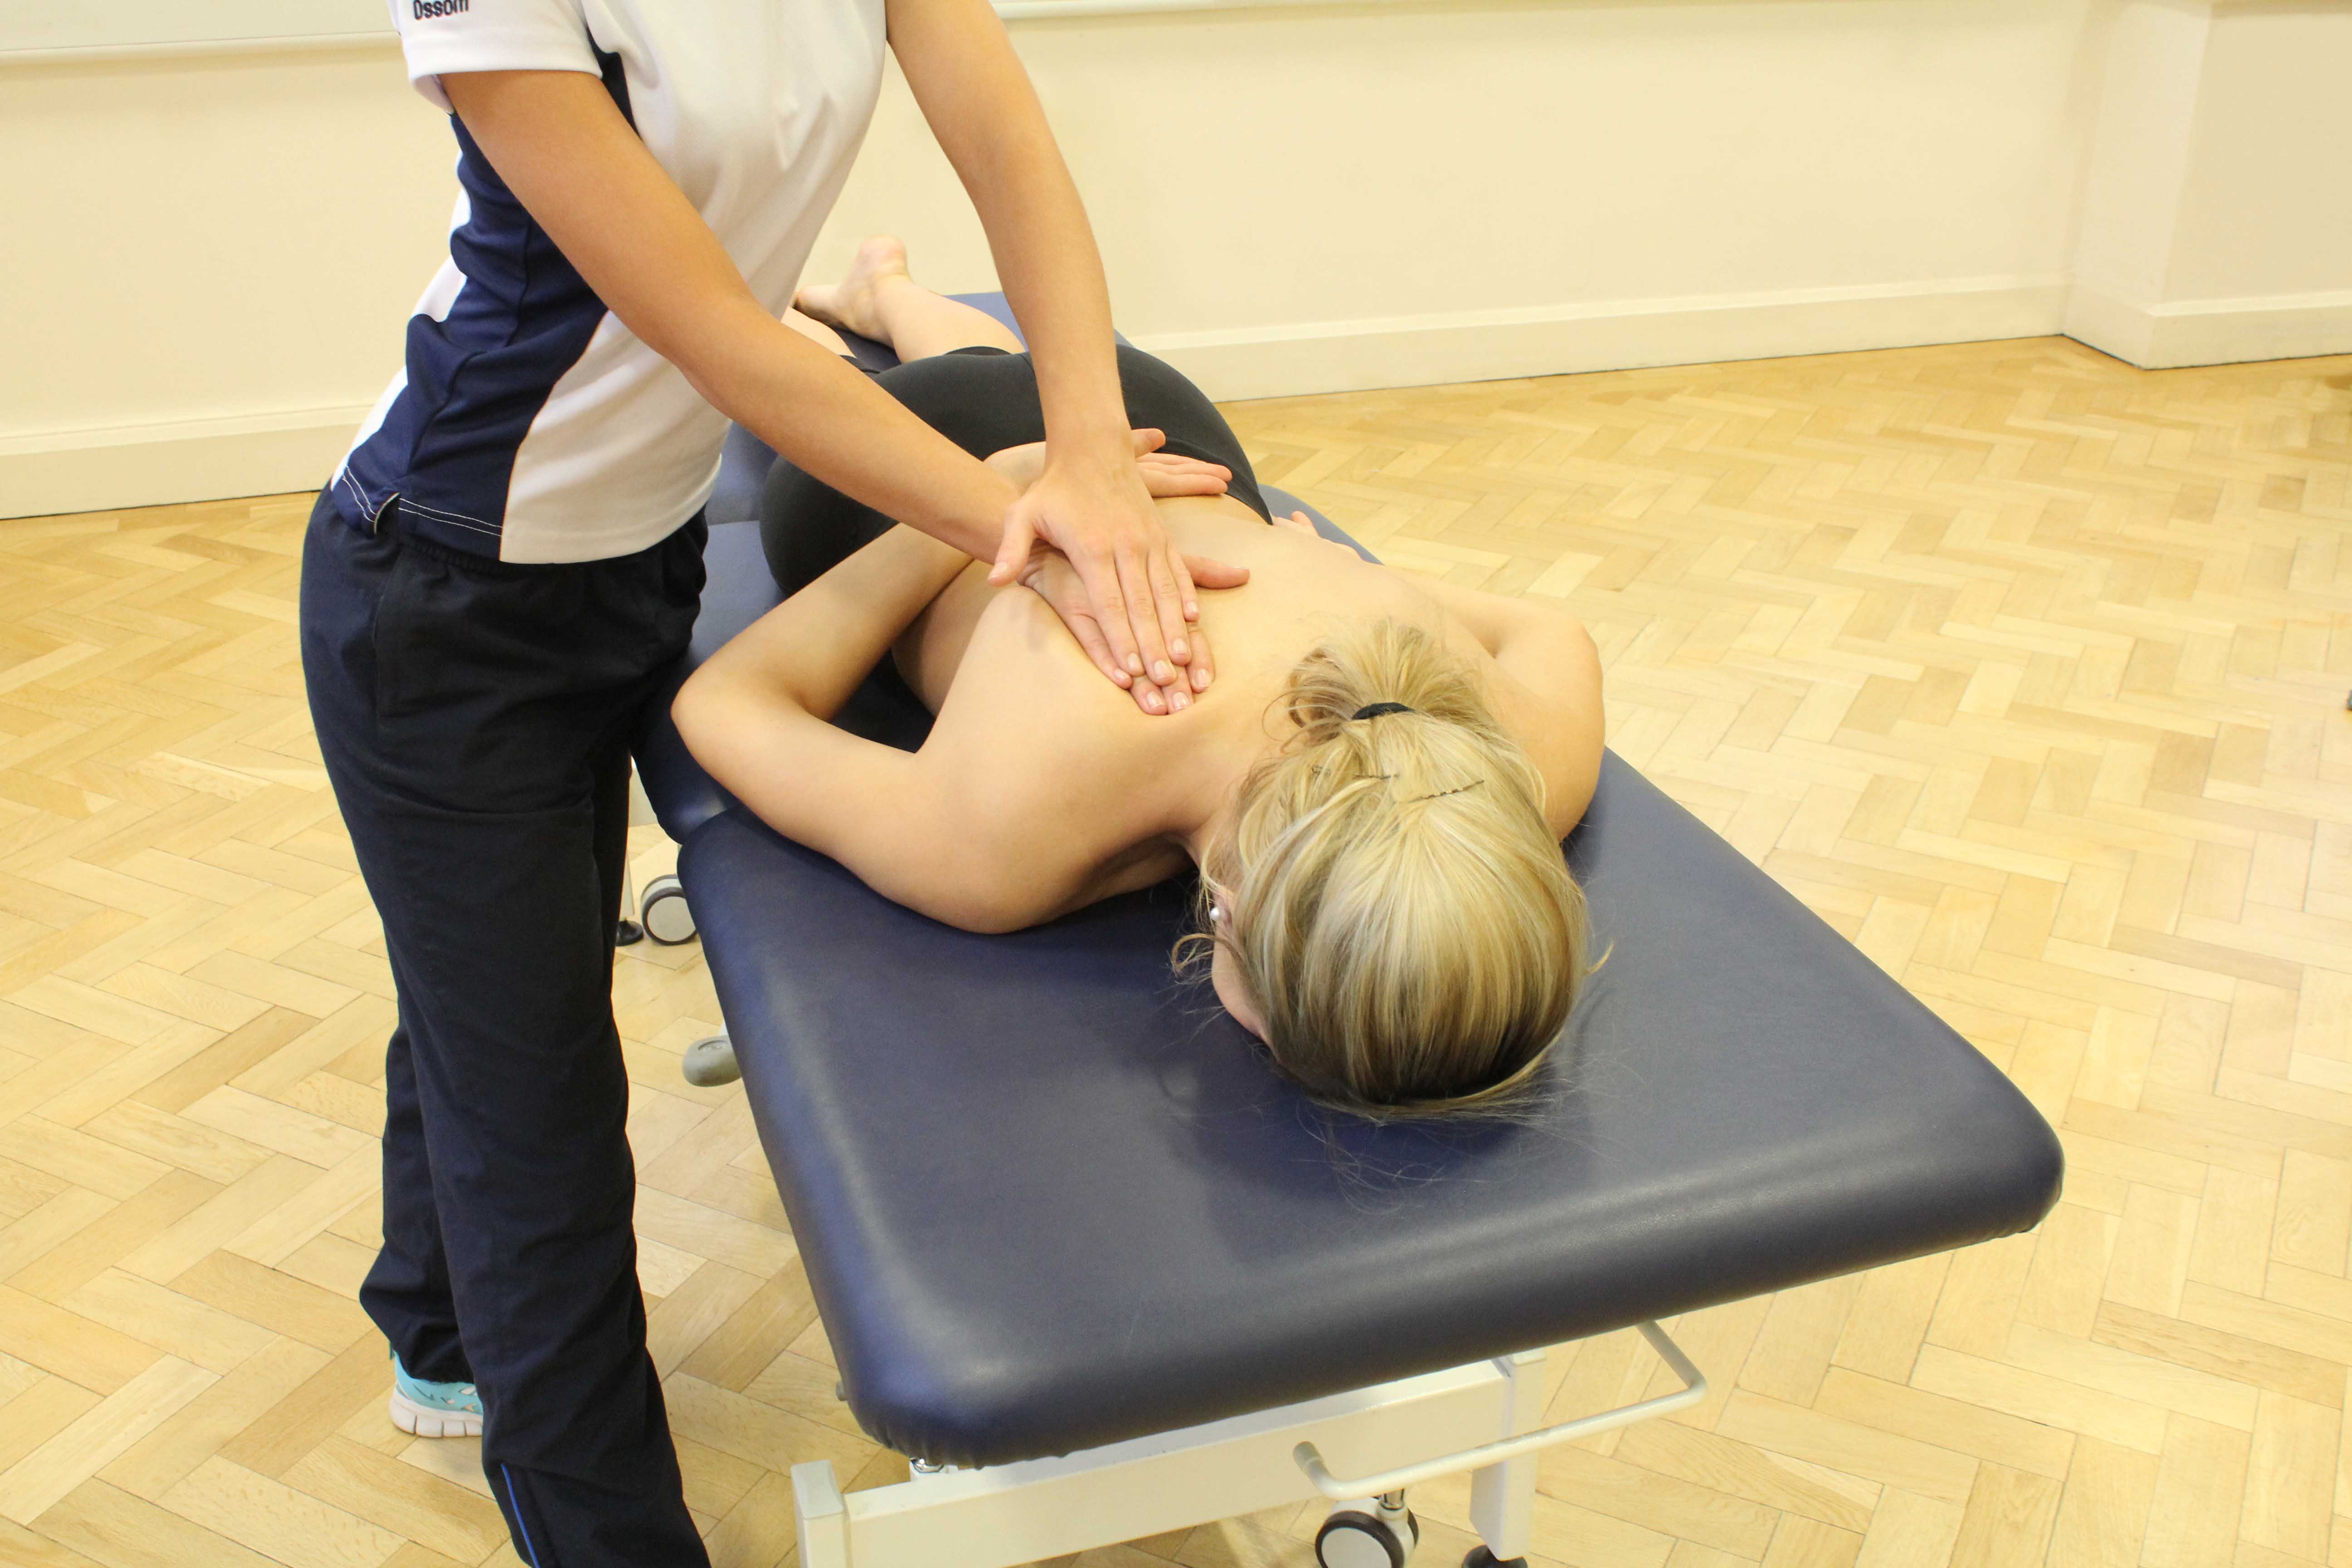 Soft tissue massage and stretches to relieve pain and stiffness